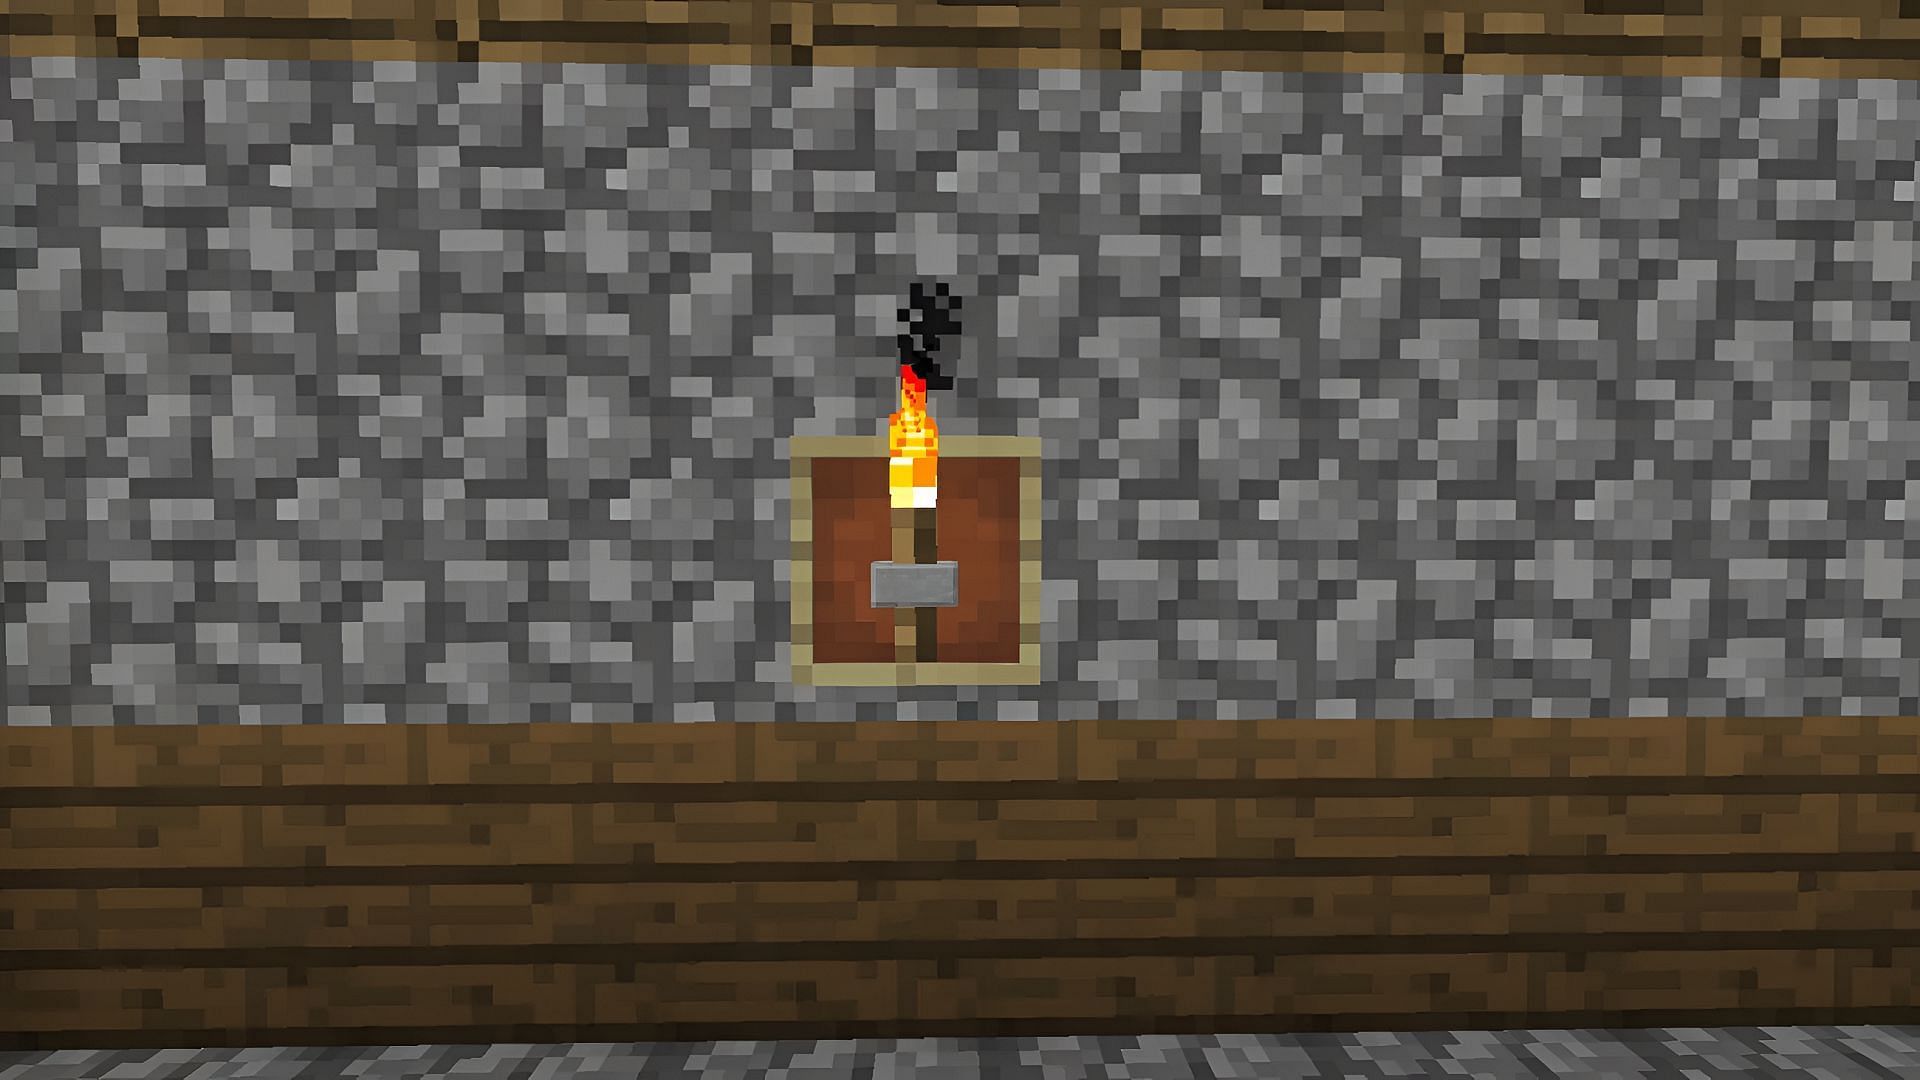 A torch is placed on a wall in Minecraft with an item frame and a button.